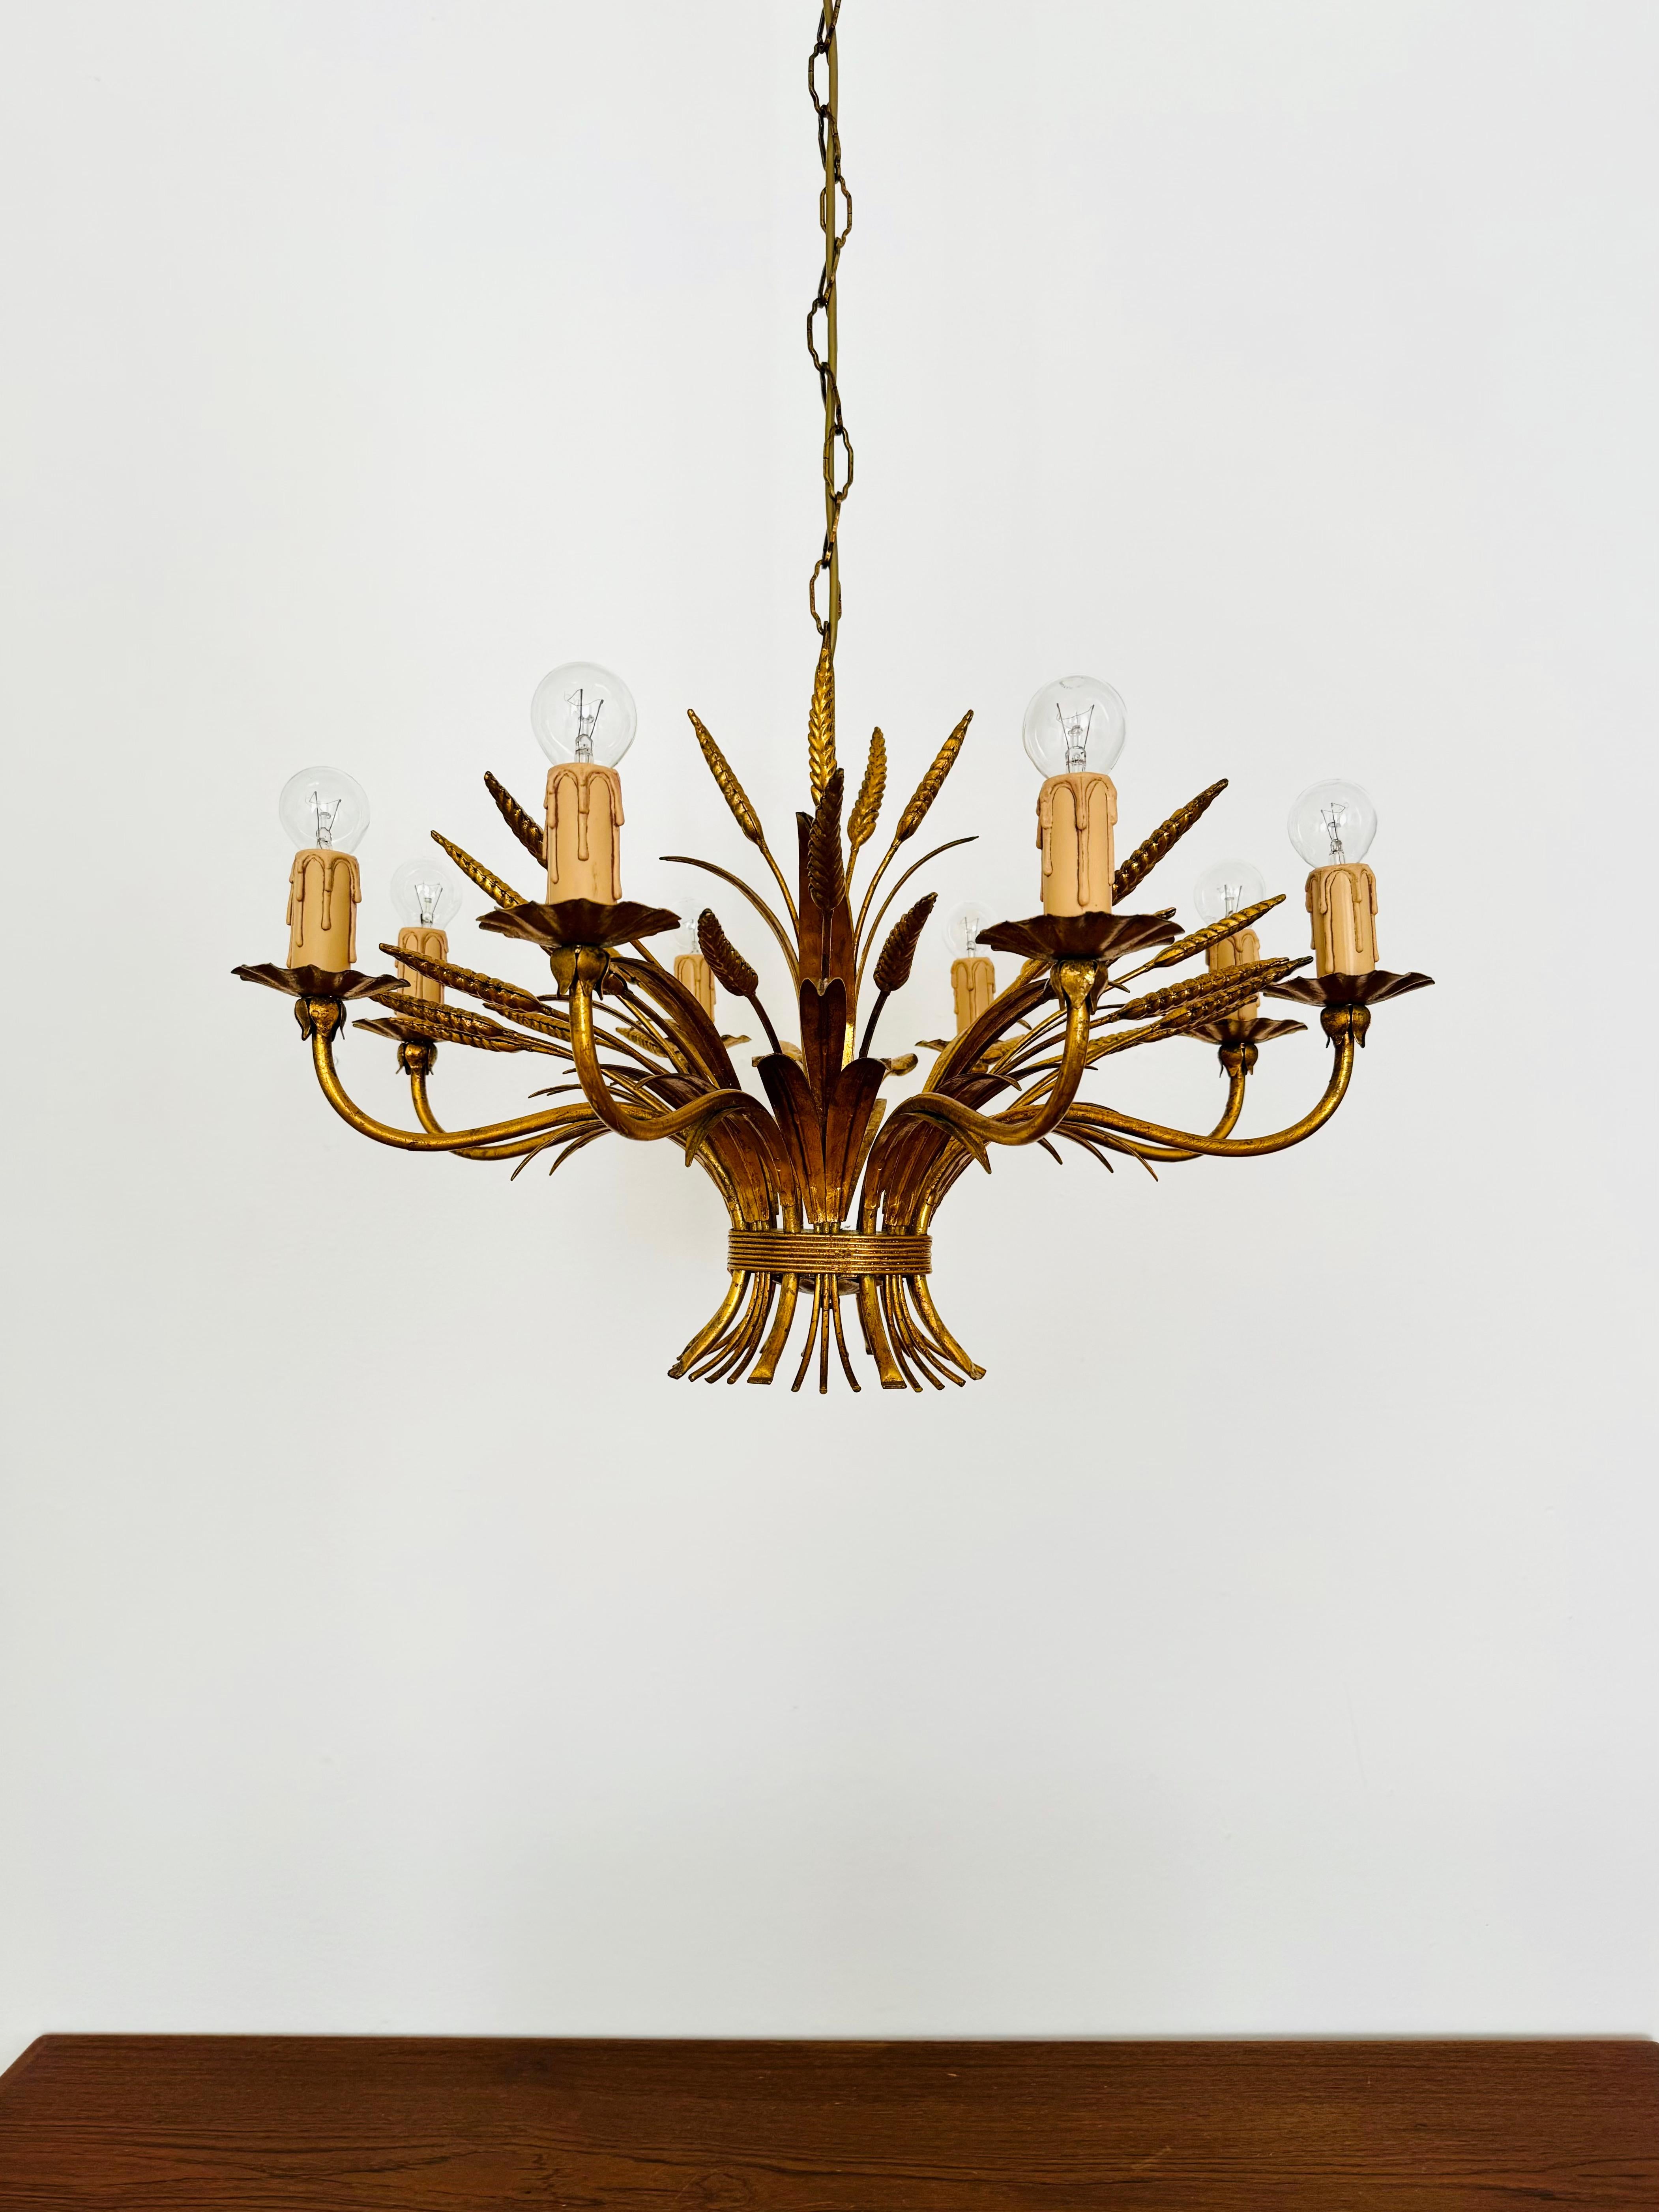 Exceptional decorative chandelier from the 1960s.
Wonderful design and quality craftsmanship.
A warm light is created.

Design: Hans Kögl

Condition:

Very good vintage condition with slight signs of age-related wear.

The pictures are part of the